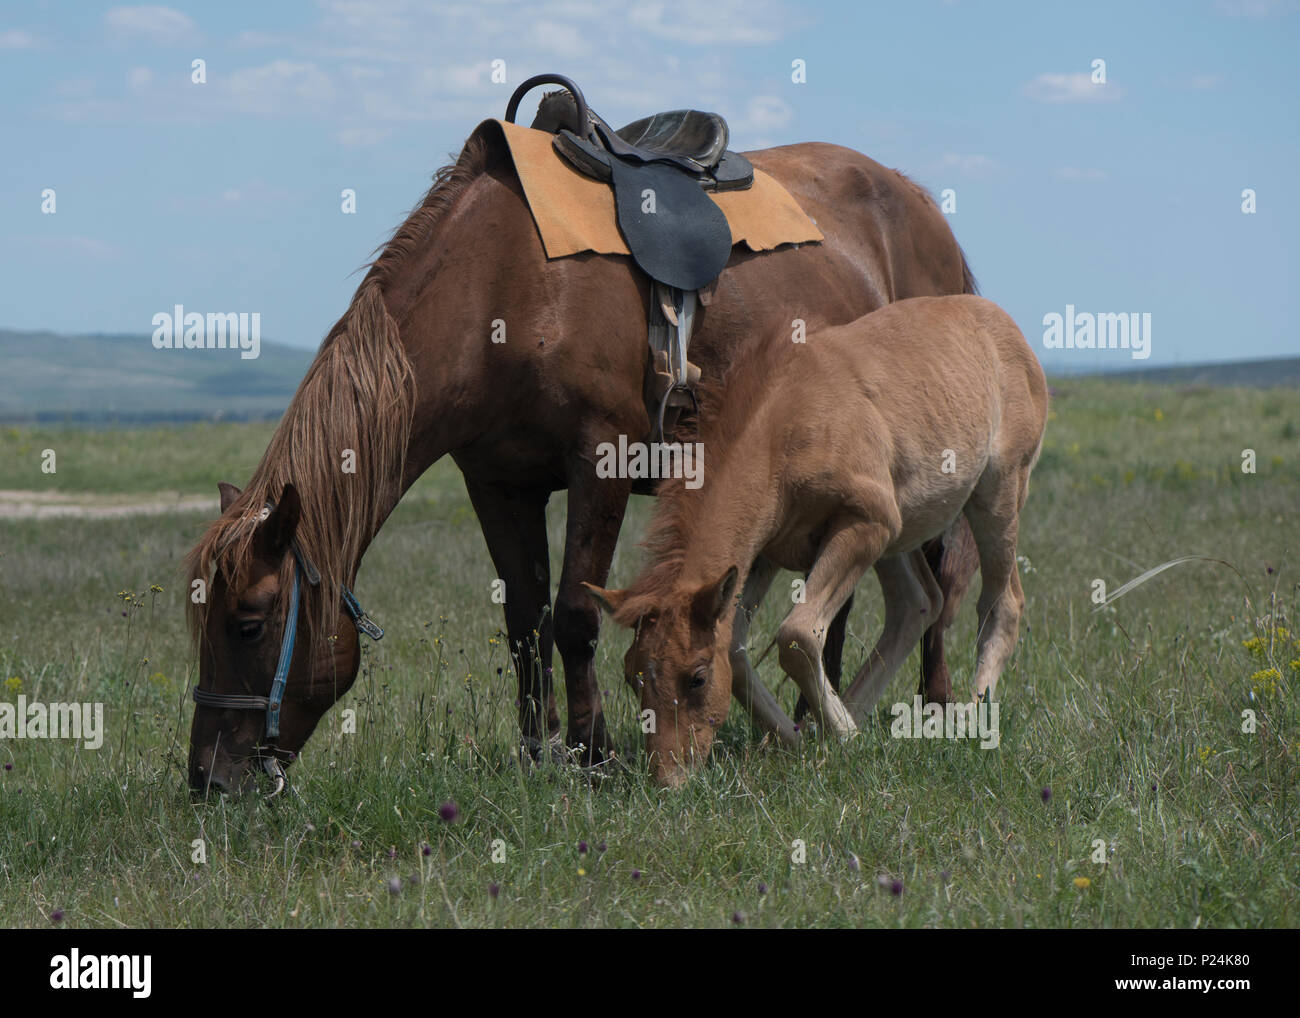 the bay horse with a foal who is grazed on a meadow Stock Photo